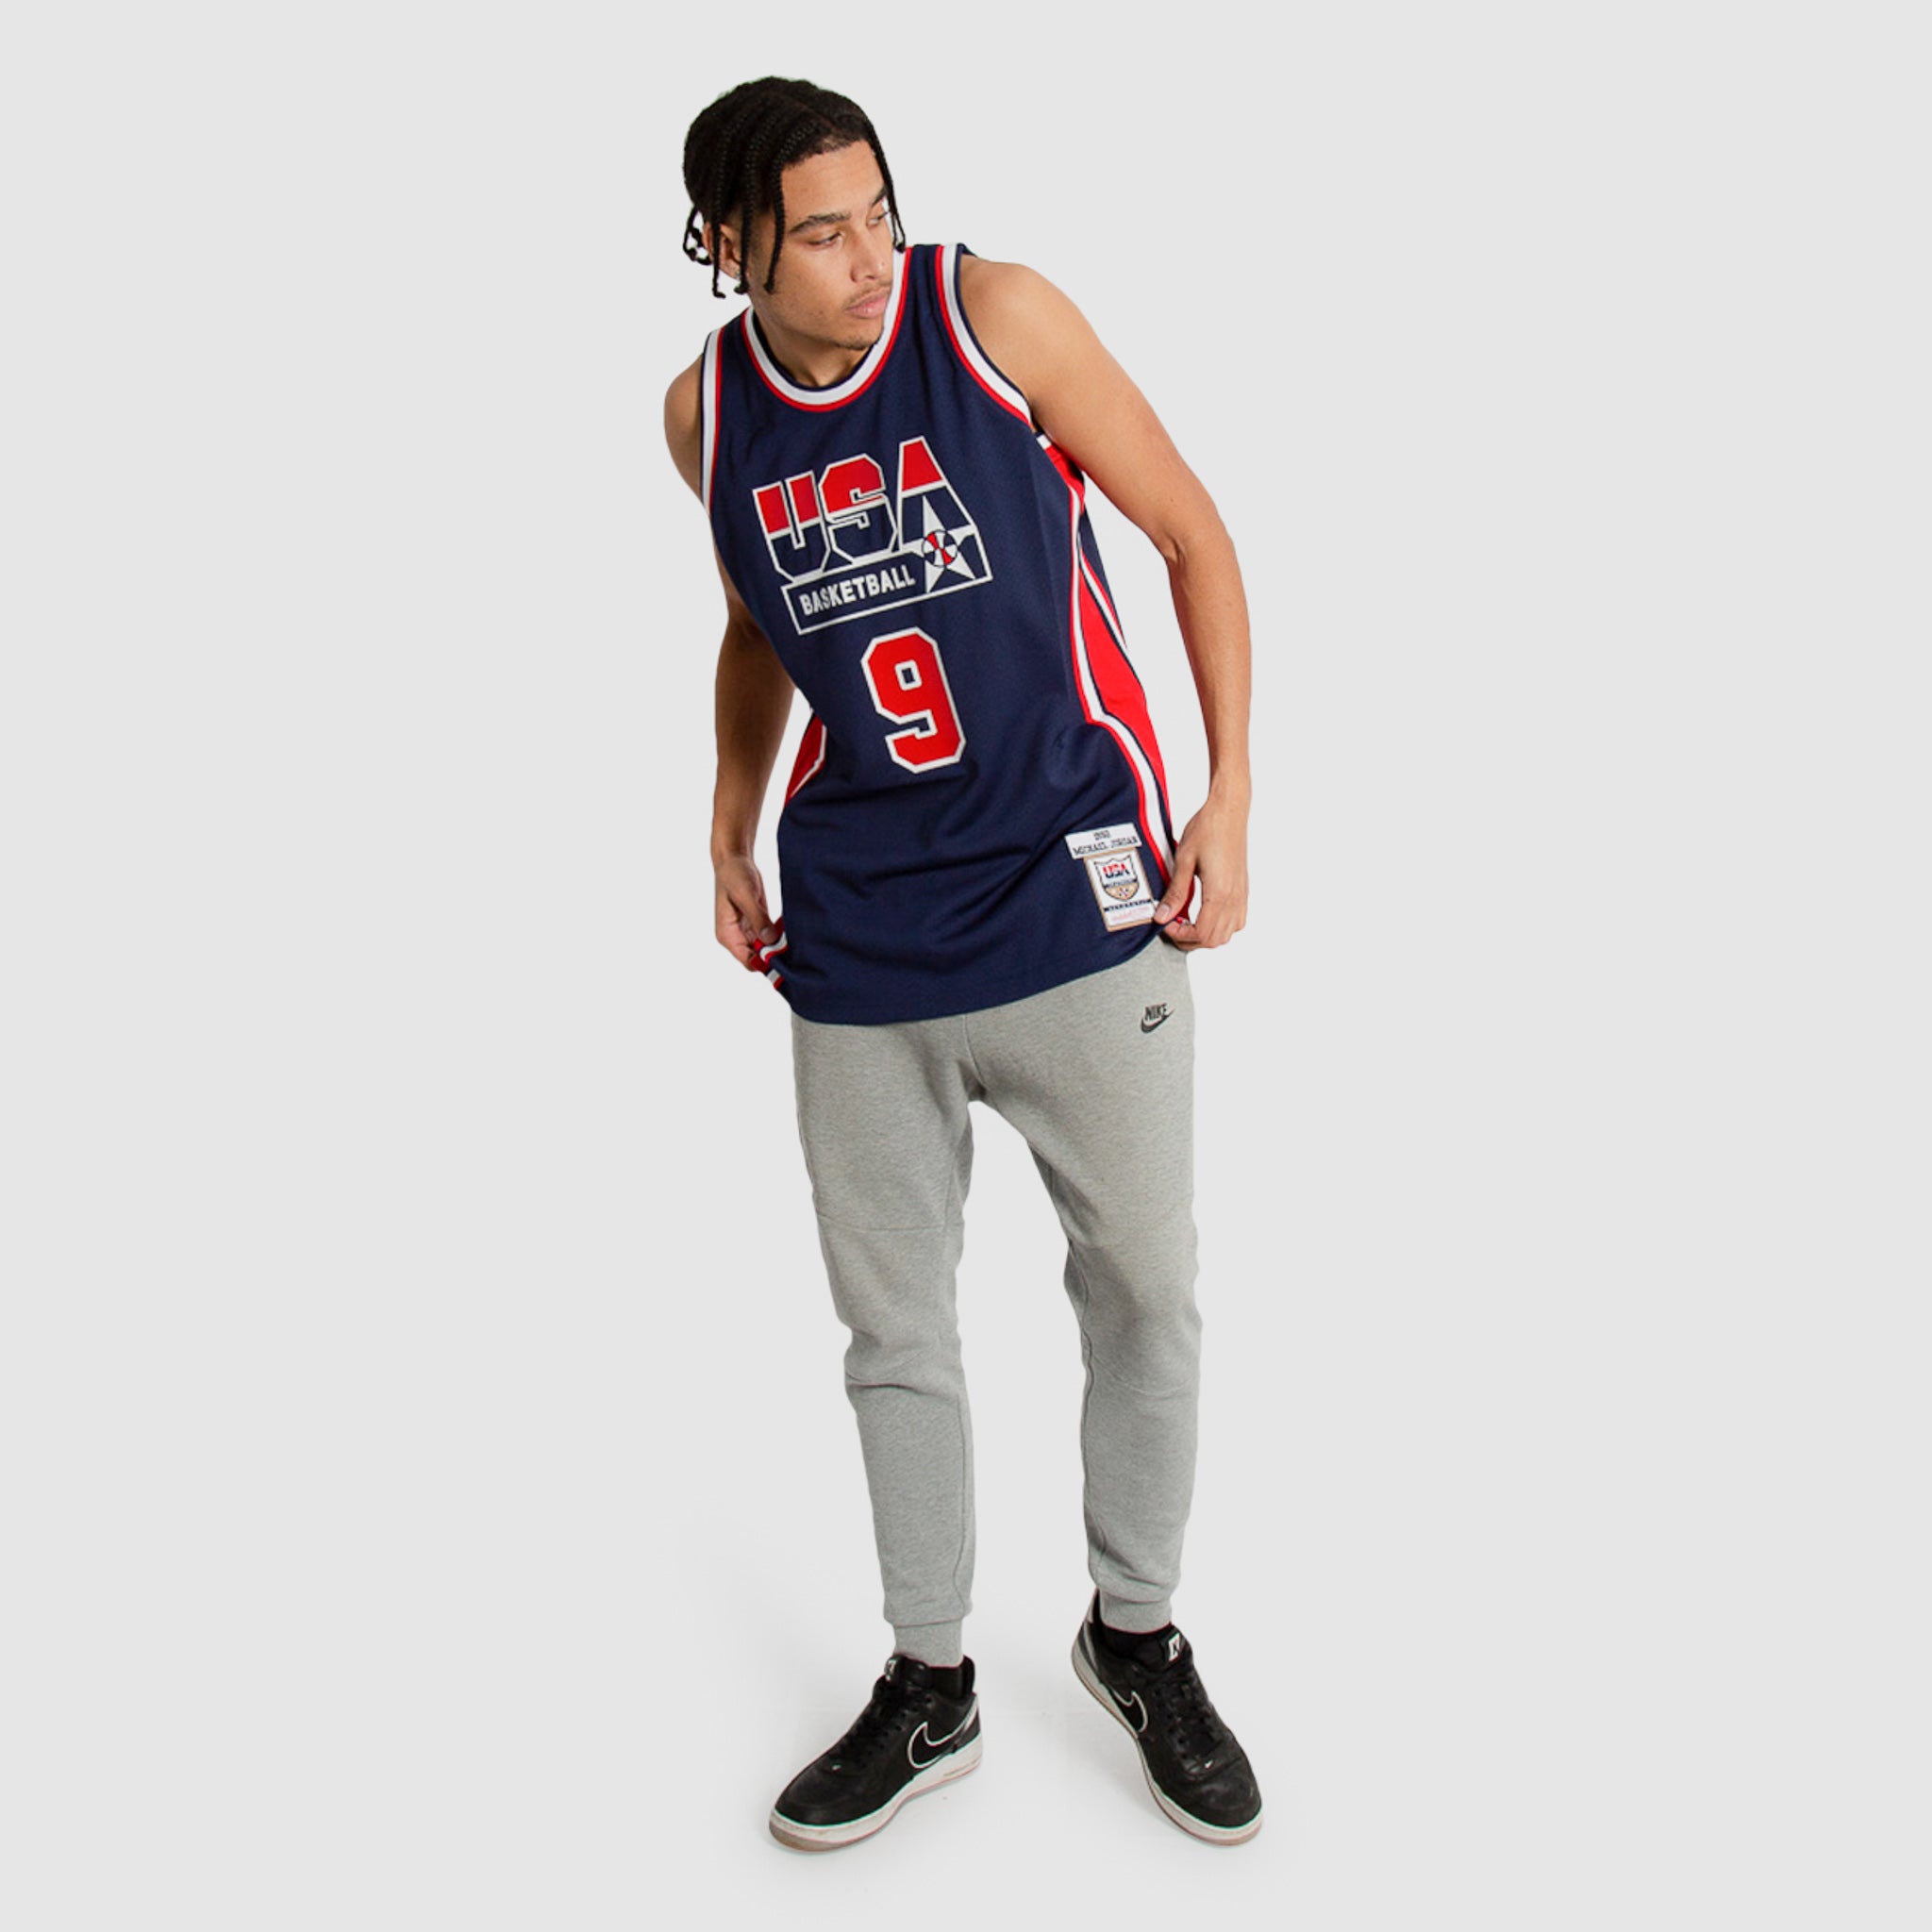 Throwback Thursday: Snag jerseys, shorts and sweaters commemorating the  1992 USA Dream Team